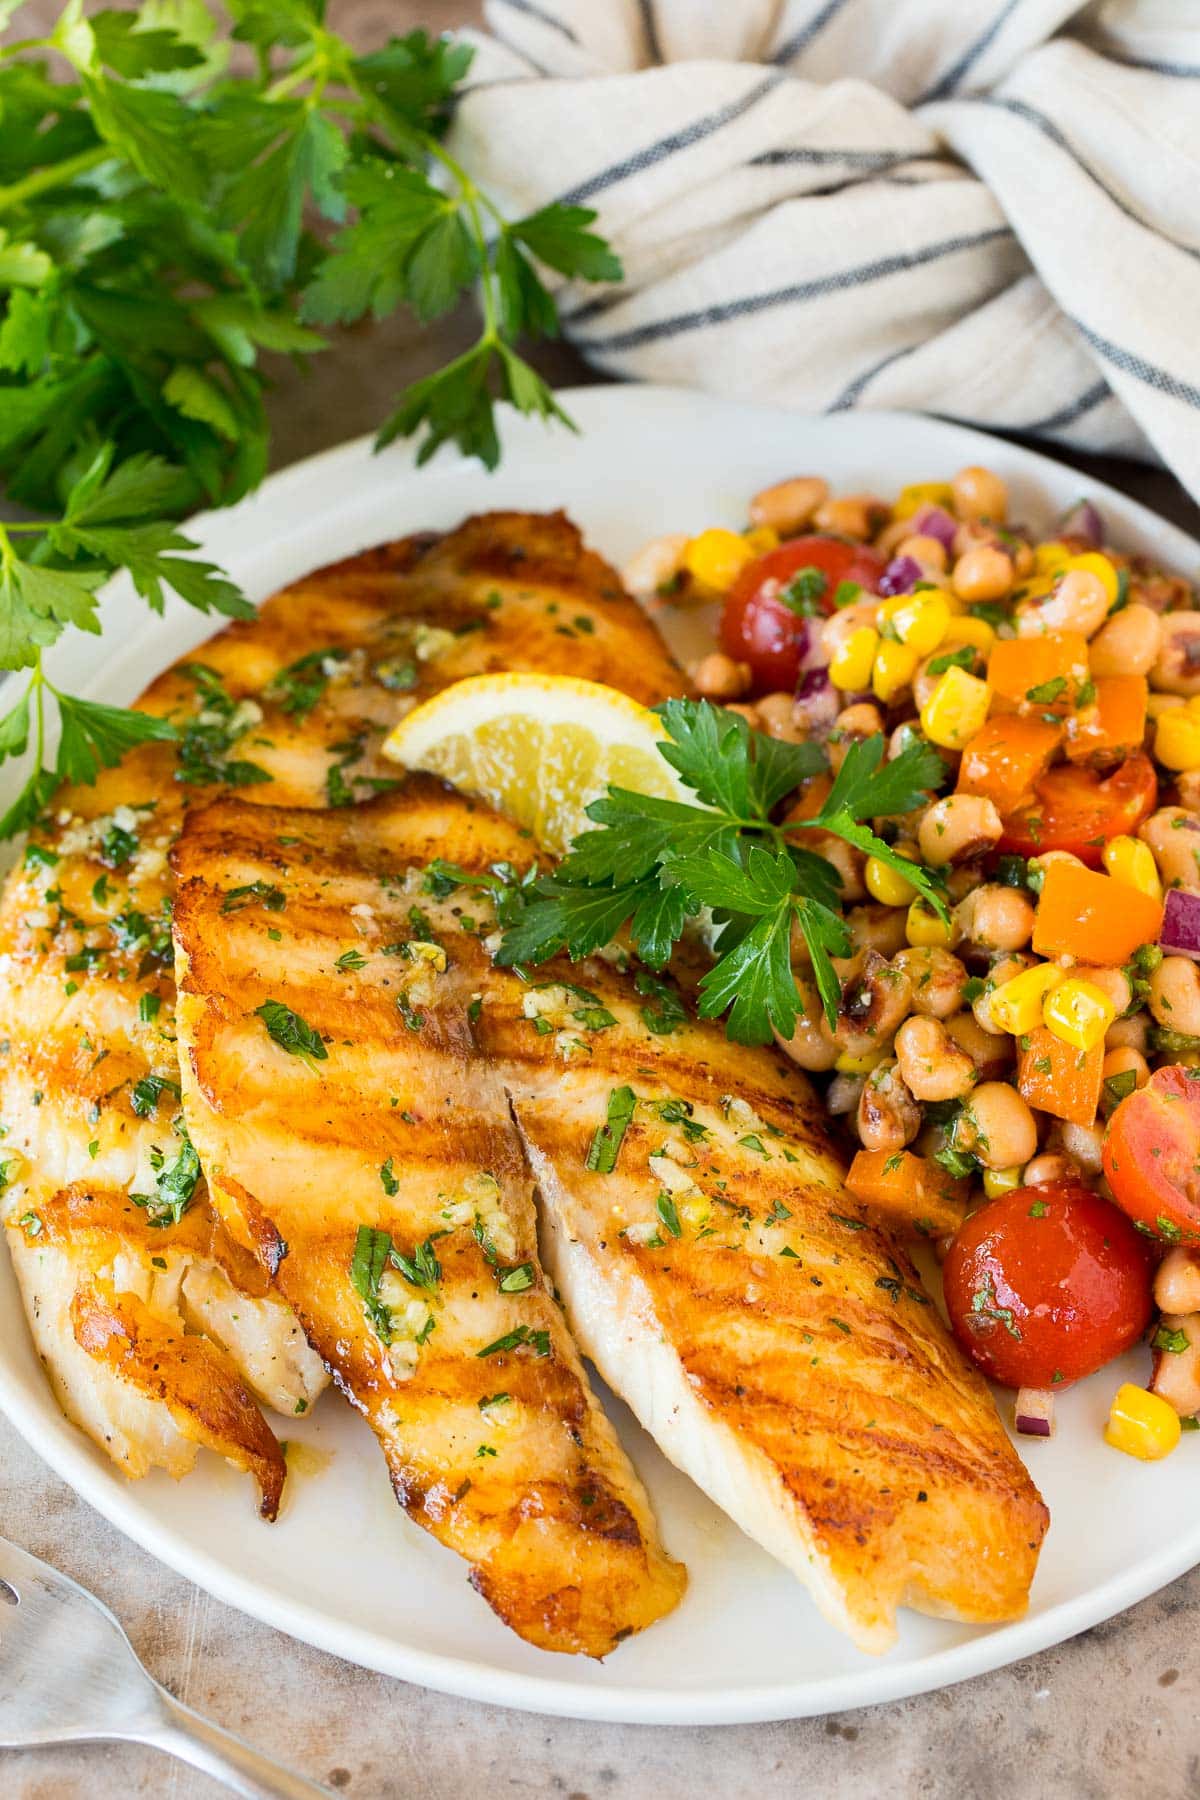 Grilled tilapia on a plate with bean salad.